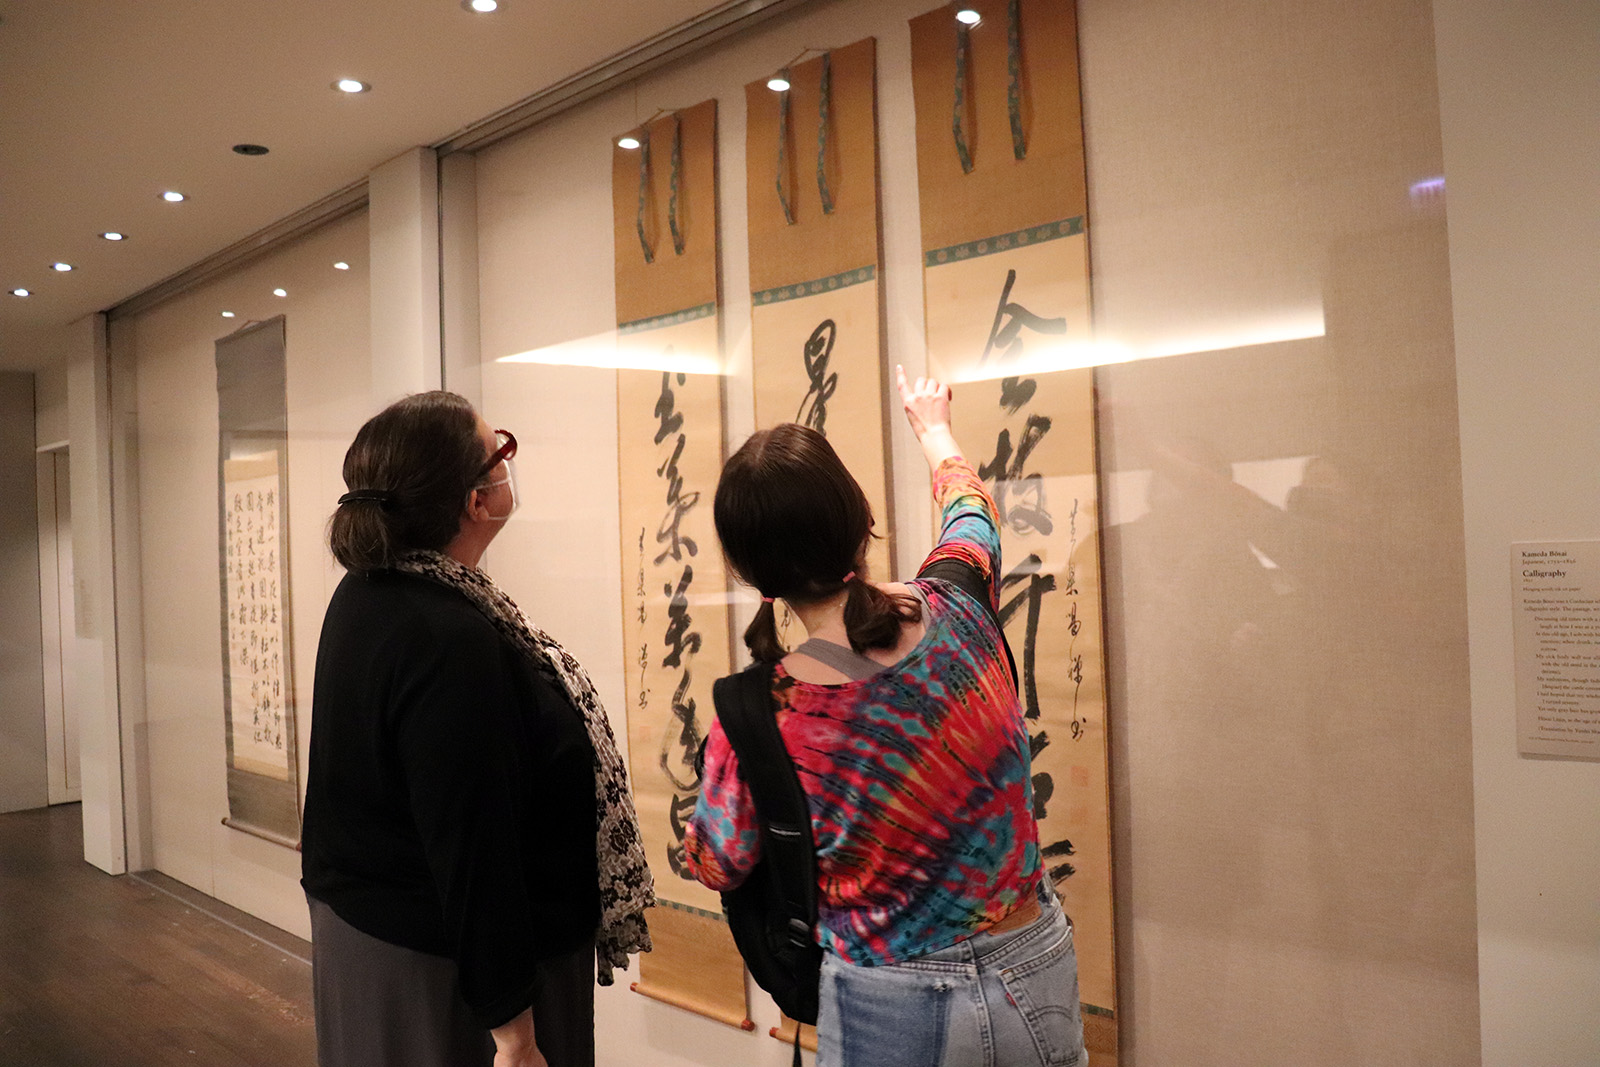 two women stand together poining and looking at three hanging banners displaying calligraphy by Japanese artist, Kameda Bōsai